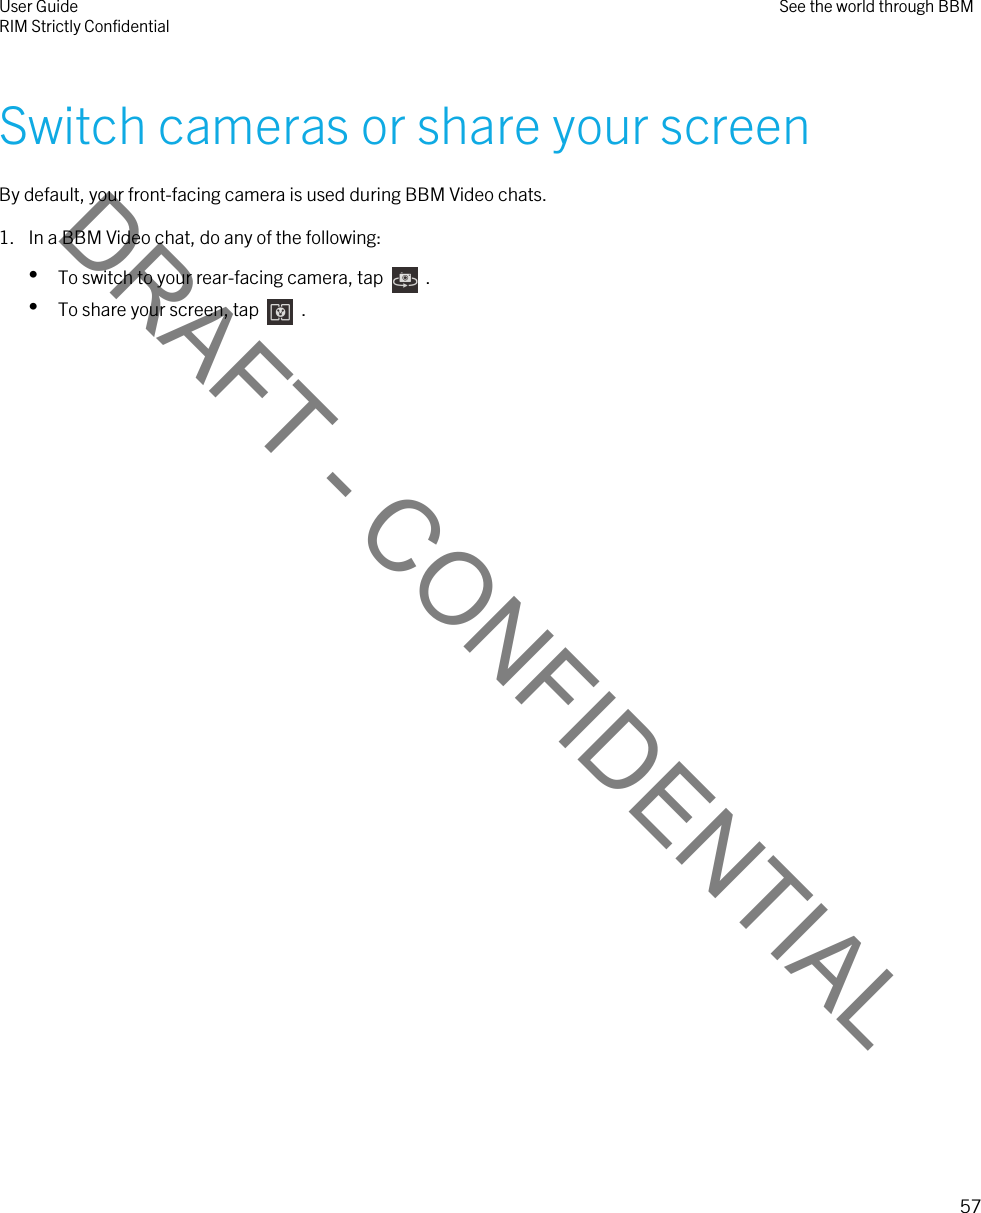 DRAFT - CONFIDENTIALSwitch cameras or share your screenBy default, your front-facing camera is used during BBM Video chats.1. In a BBM Video chat, do any of the following:•To switch to your rear-facing camera, tap    .•To share your screen, tap    .User GuideRIM Strictly Confidential See the world through BBM57 